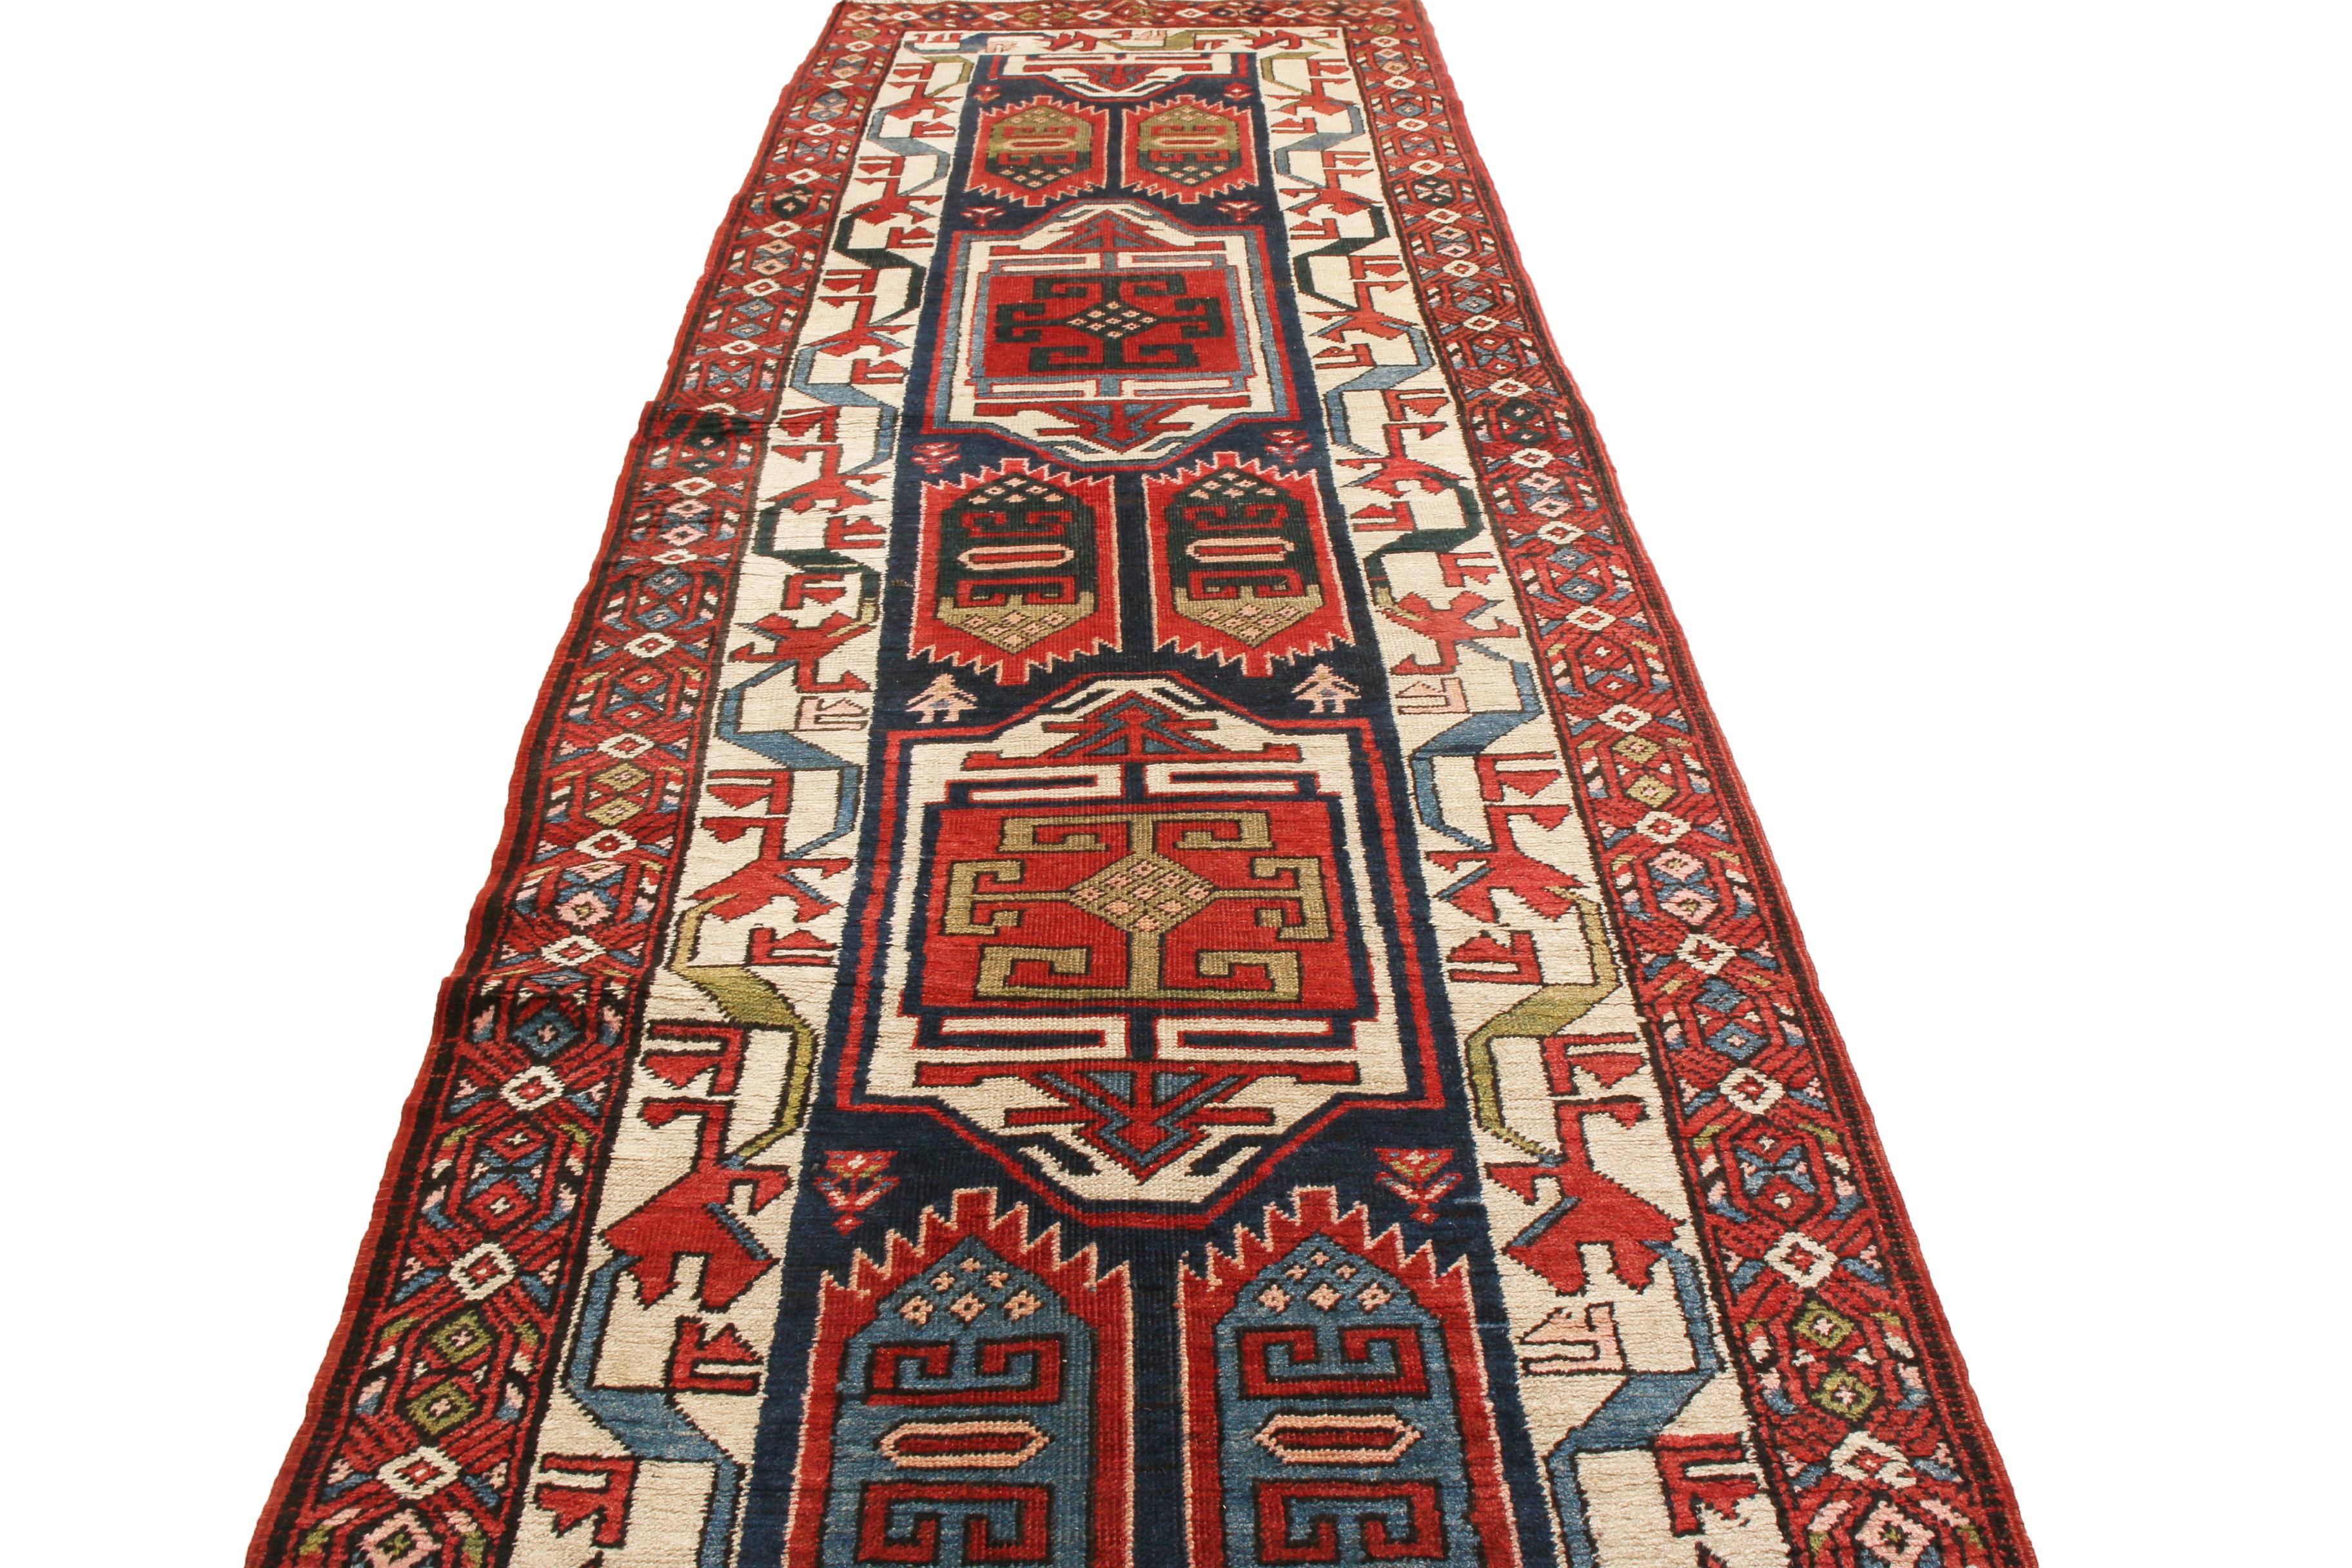 Originating from Persia in 1880, this antique Persian runner is hand-knotted in high-quality wool, featuring a Heriz design. Named for one of the most time-honored centers of Persian rug production in history, the field design repeats several tribal